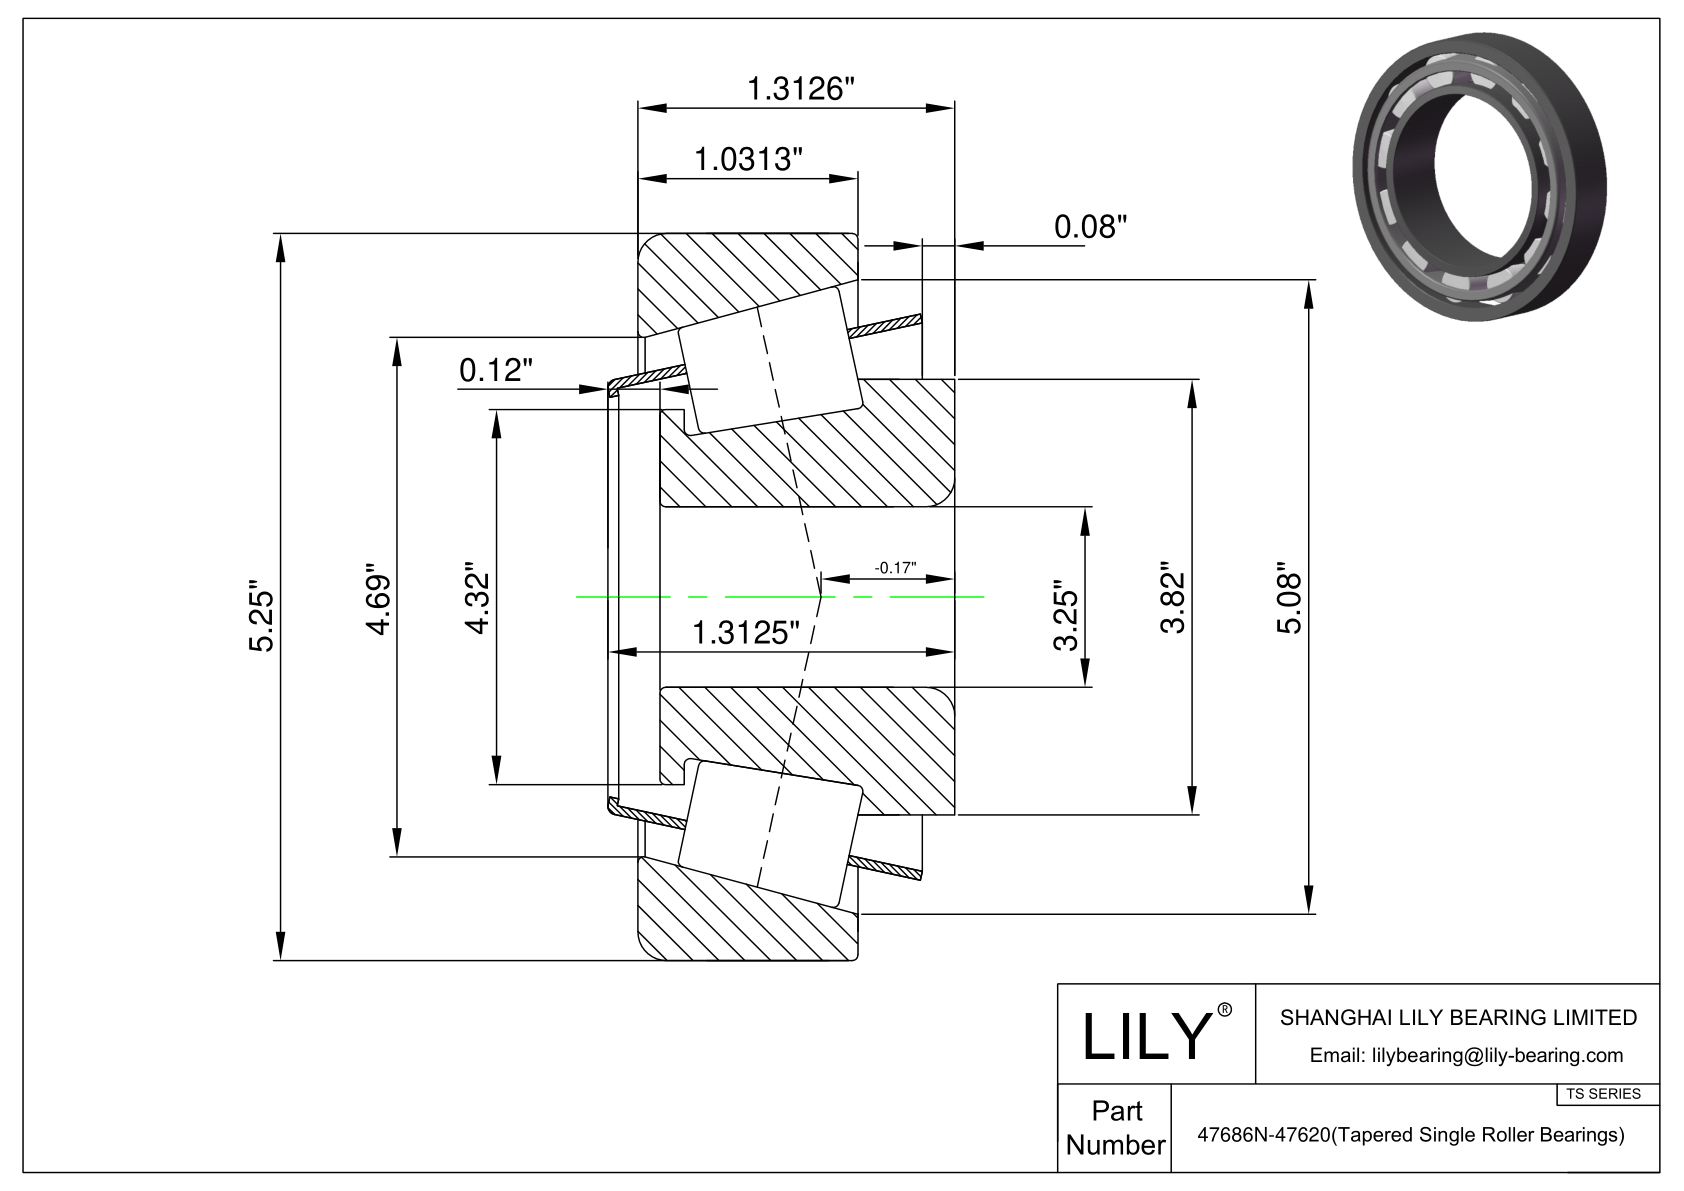 47686N-47620 TS (Tapered Single Roller Bearings) (Imperial) cad drawing